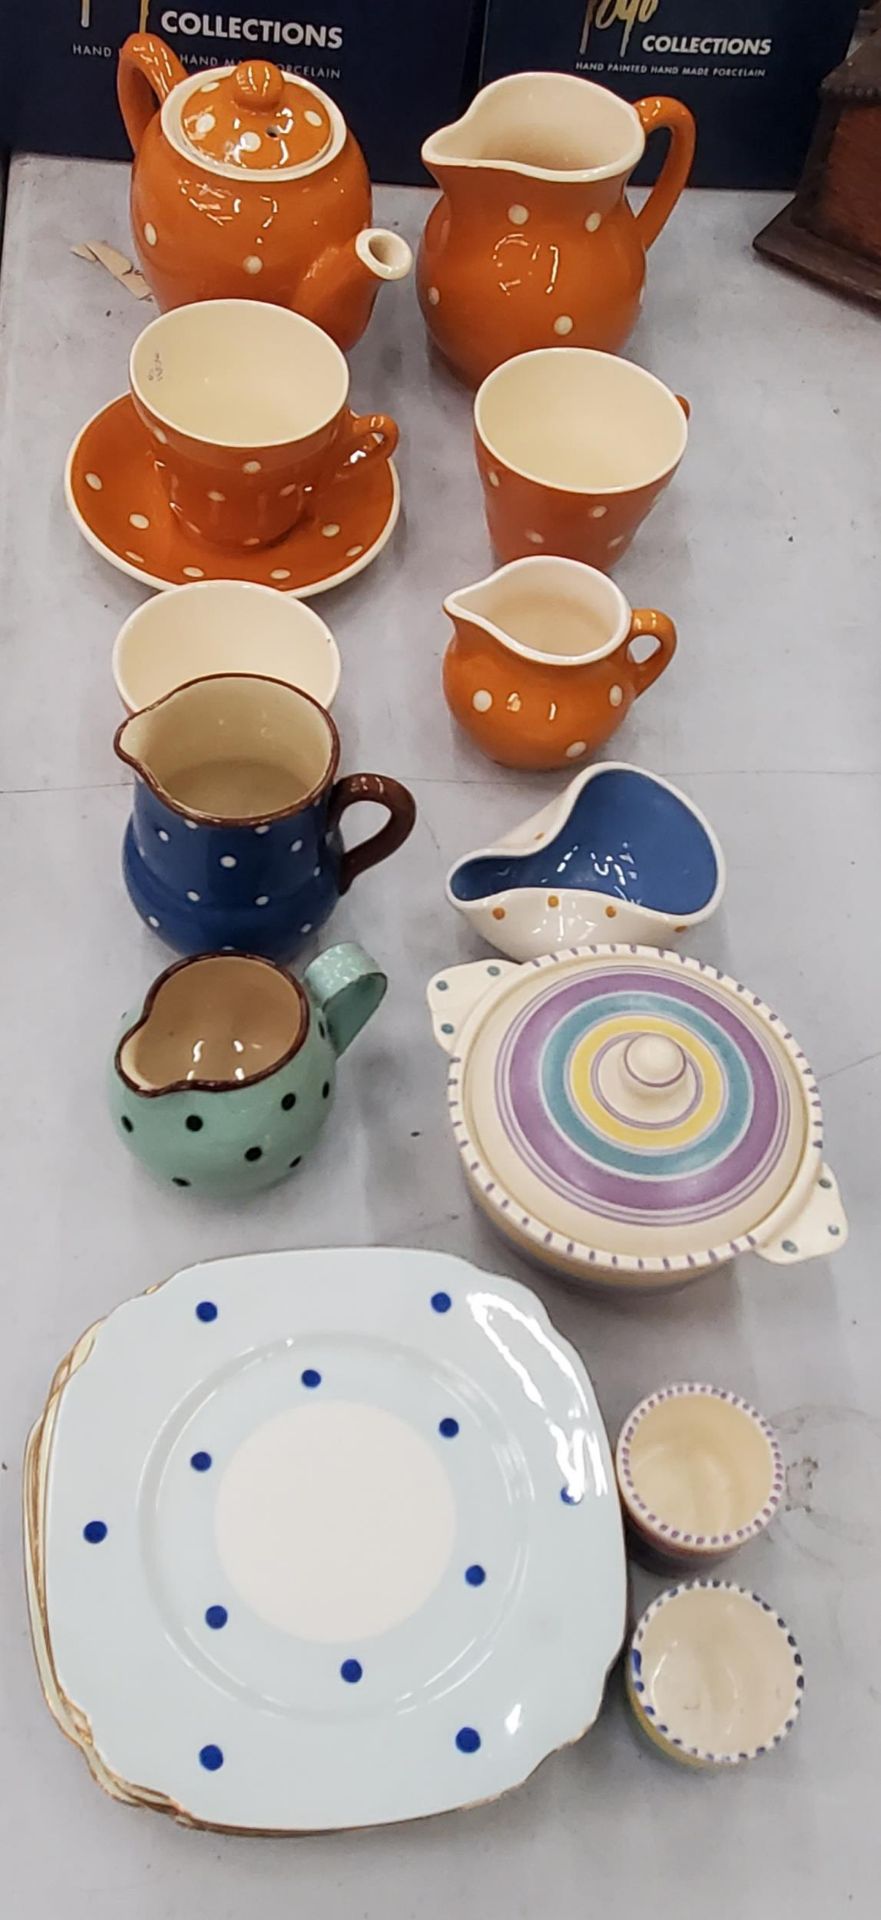 A SANDYGATE POTTERY, DEVON PART TEASET TO INCLUDE A TEAPOT, CREAM JUGS, SUGAR BOWL, CUPS AND ONE